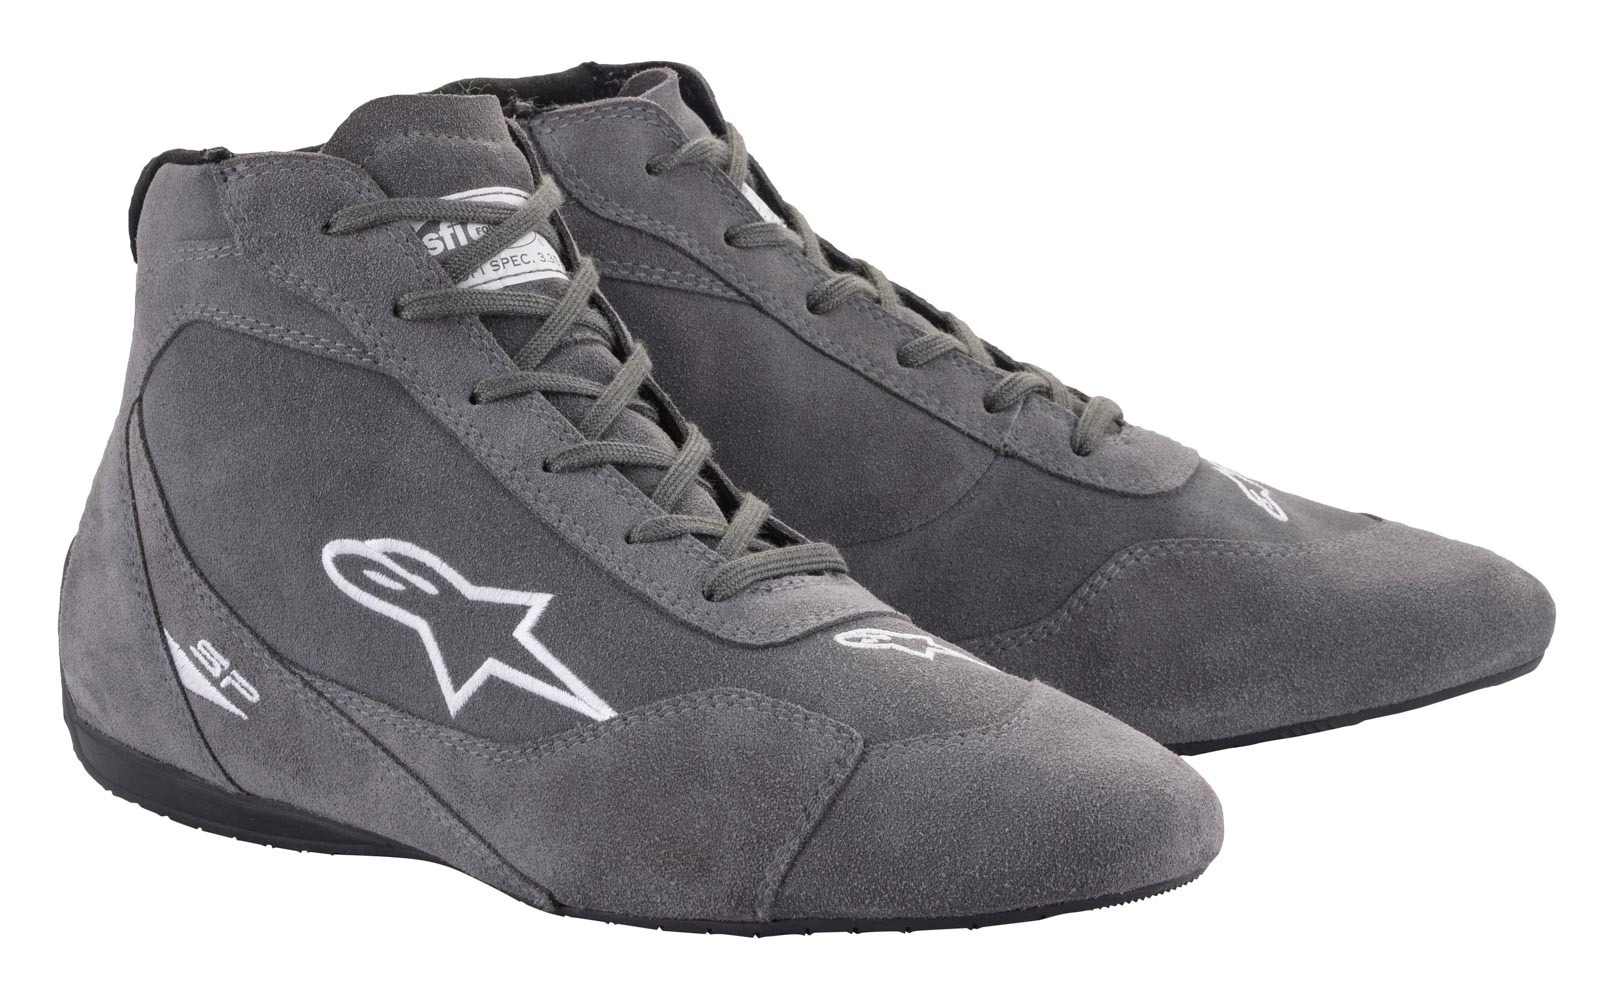 Alpinestars 2710621-11-6 Driving Shoe, SP V2, Mid-Top, SFI3.3/5, Suede Outer, Nomex Inner, Dark Gray, Size 6, Pair